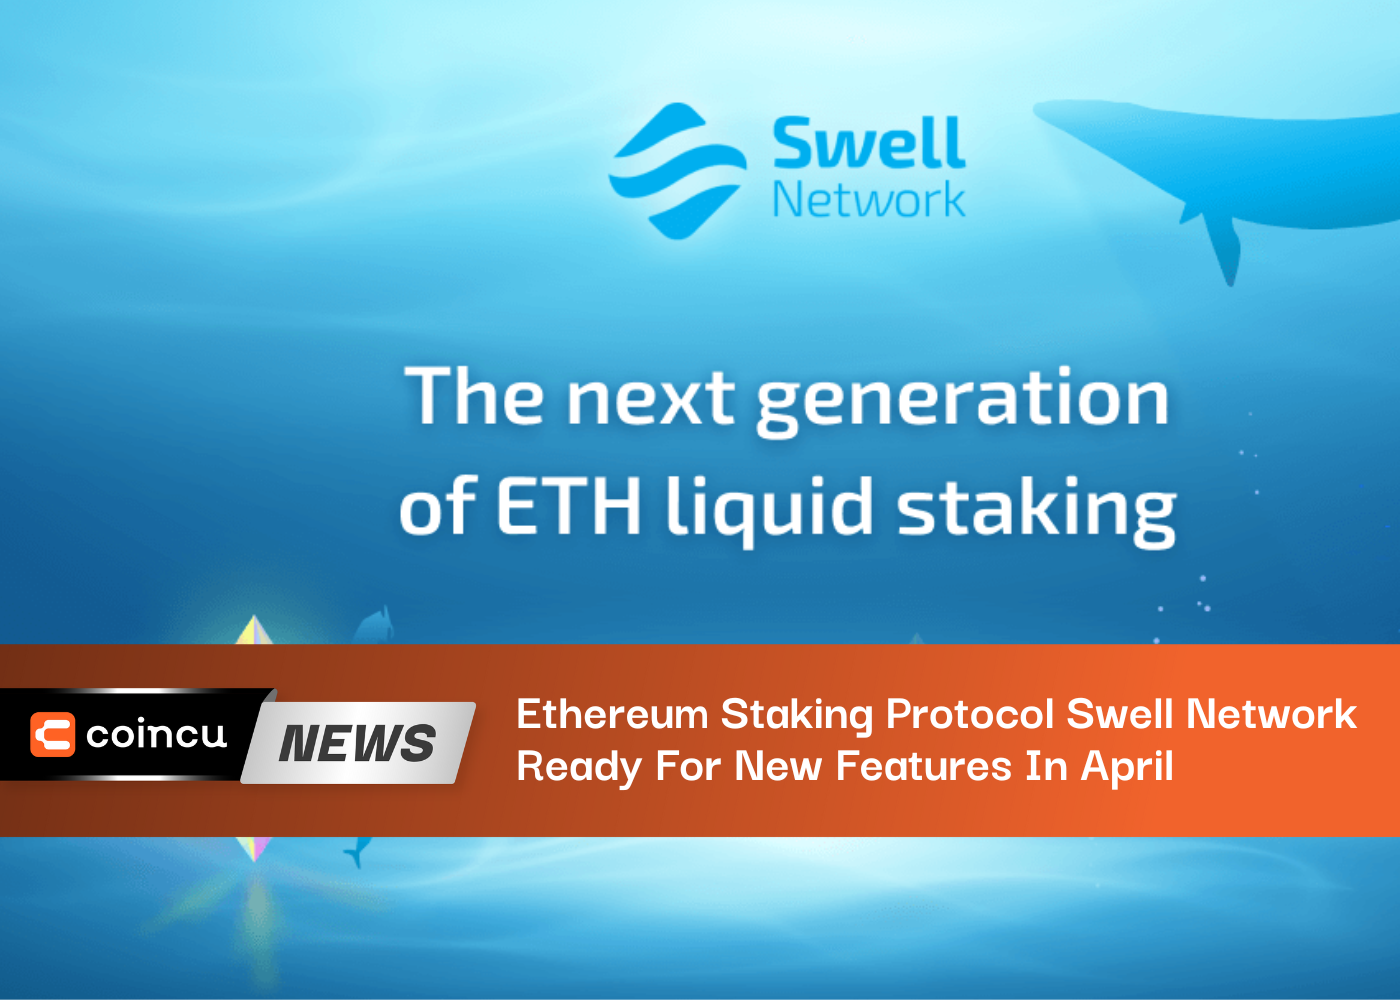 Ethereum Staking Protocol Swell Network Ready For New Features In April